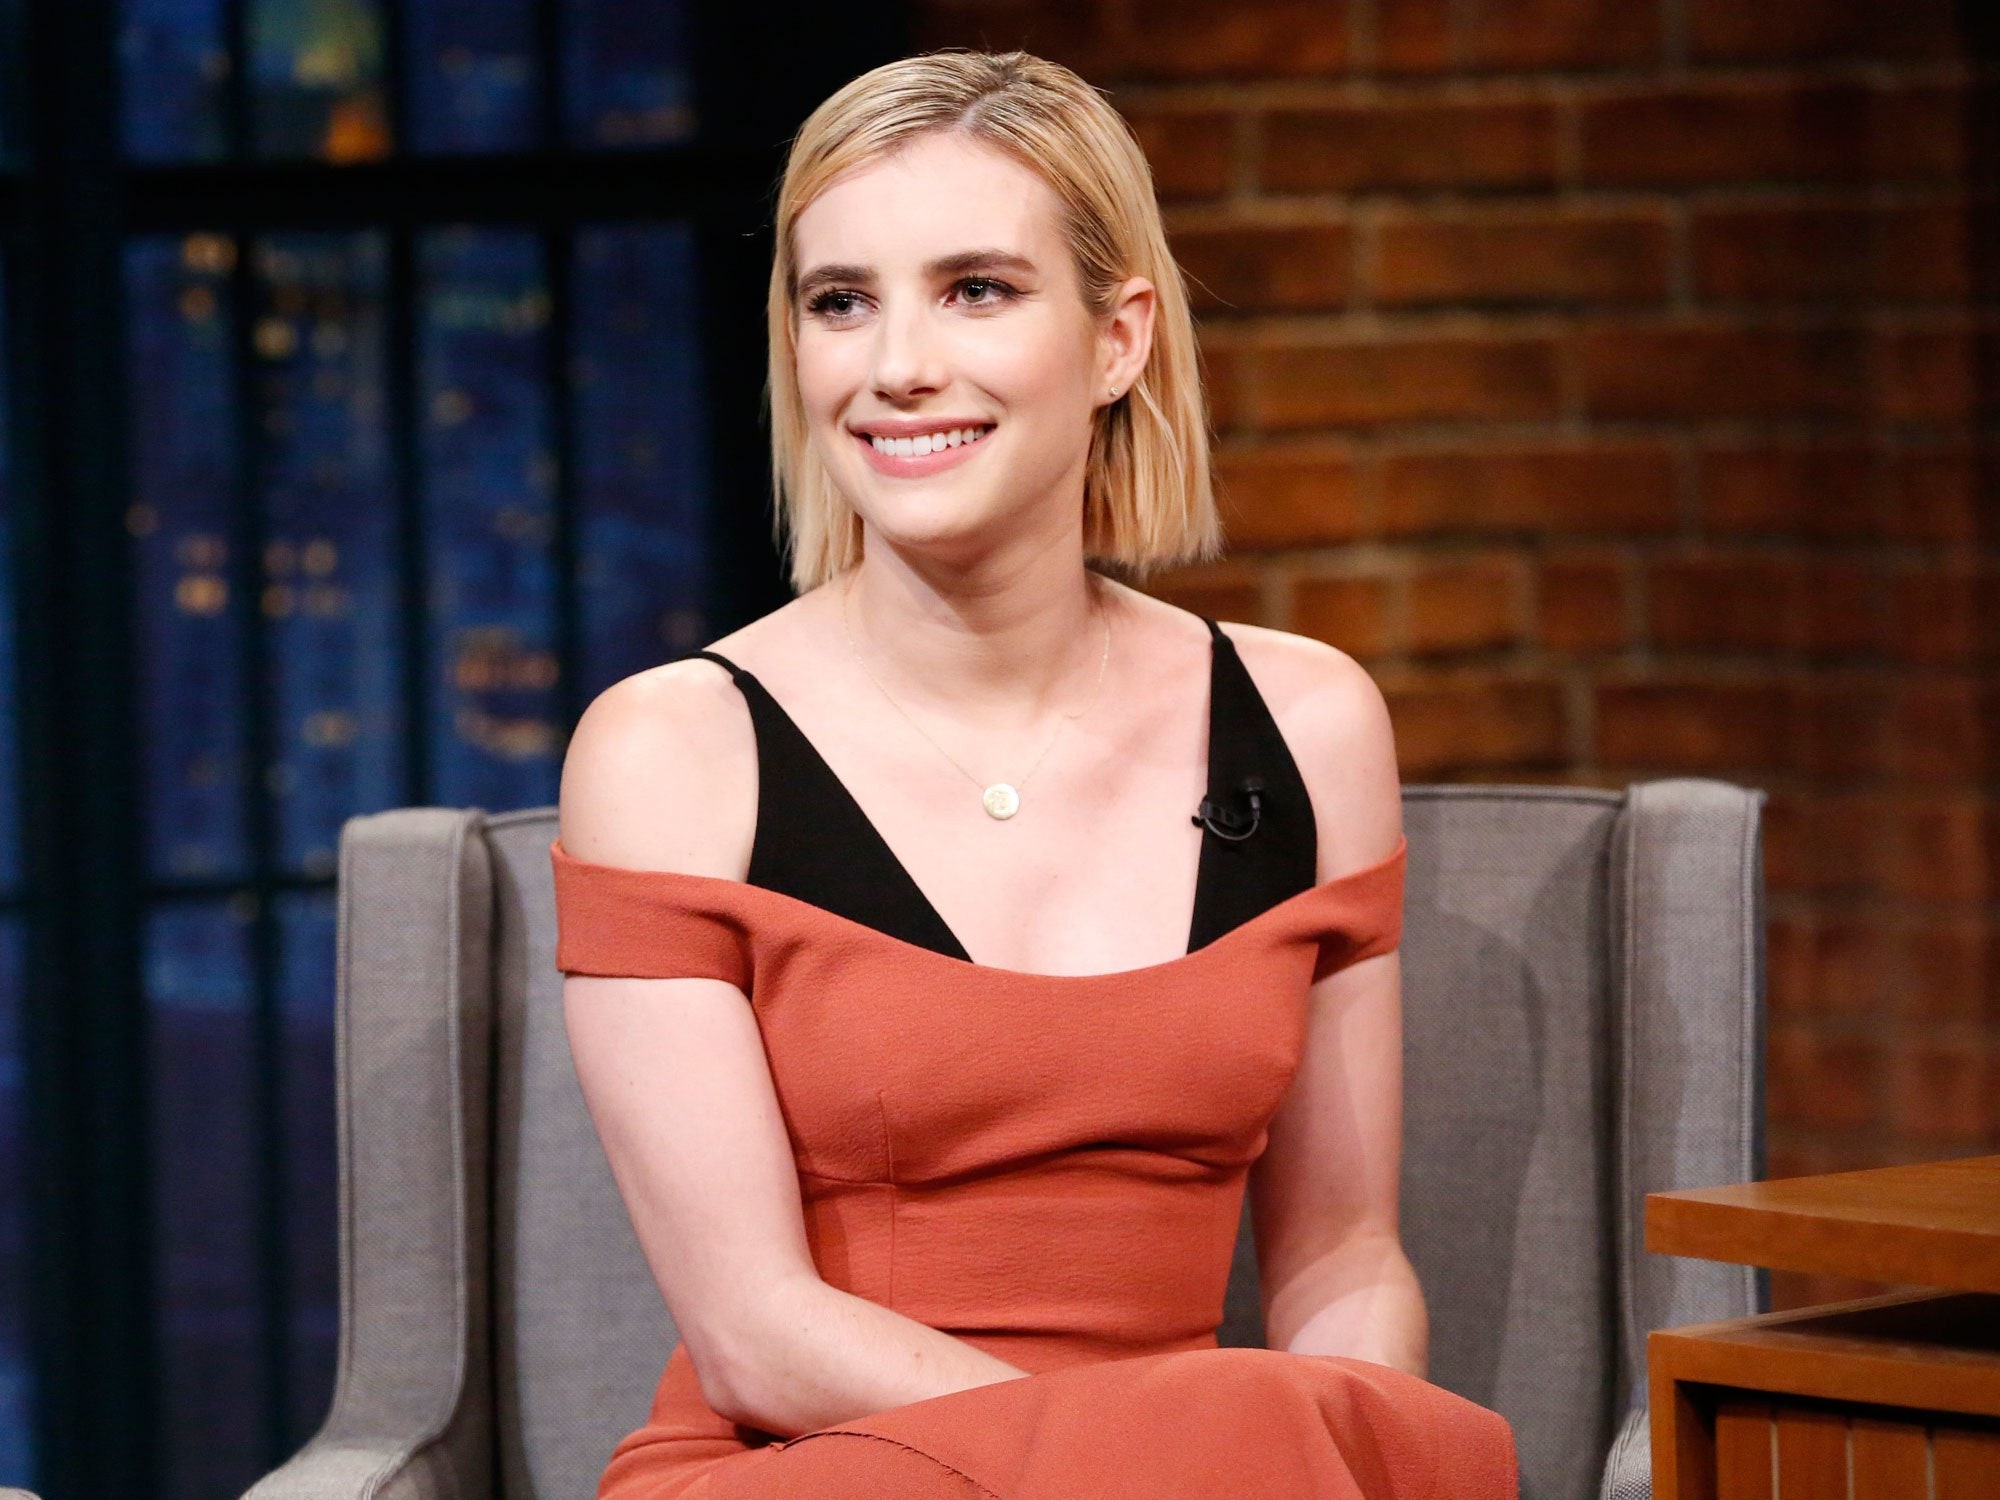 Emma Roberts In White Dress Critics Choice Awards 2018 Wallpapers